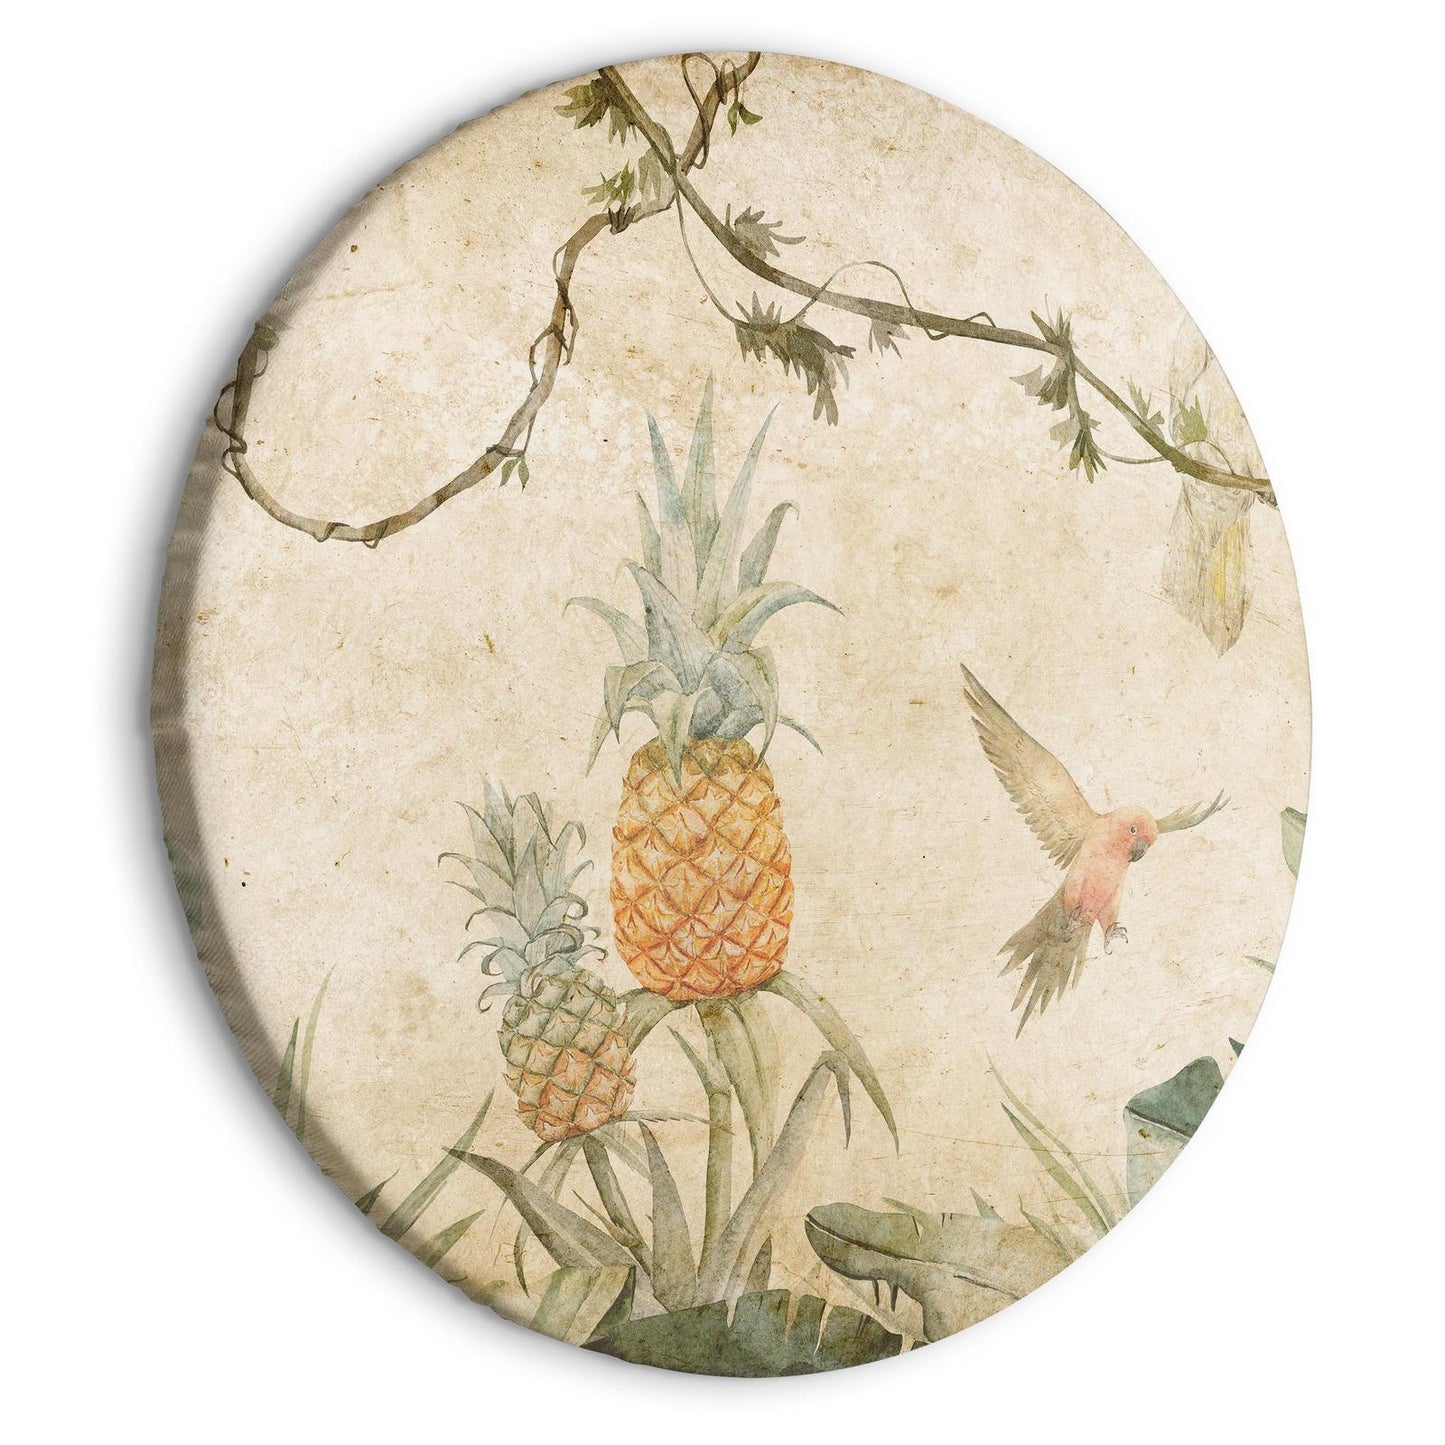 Rond schilderij - Tropics in muted colors - Parrots and pineapples amidst lush exotic flora in soft shades of green/Parrots in the jungle